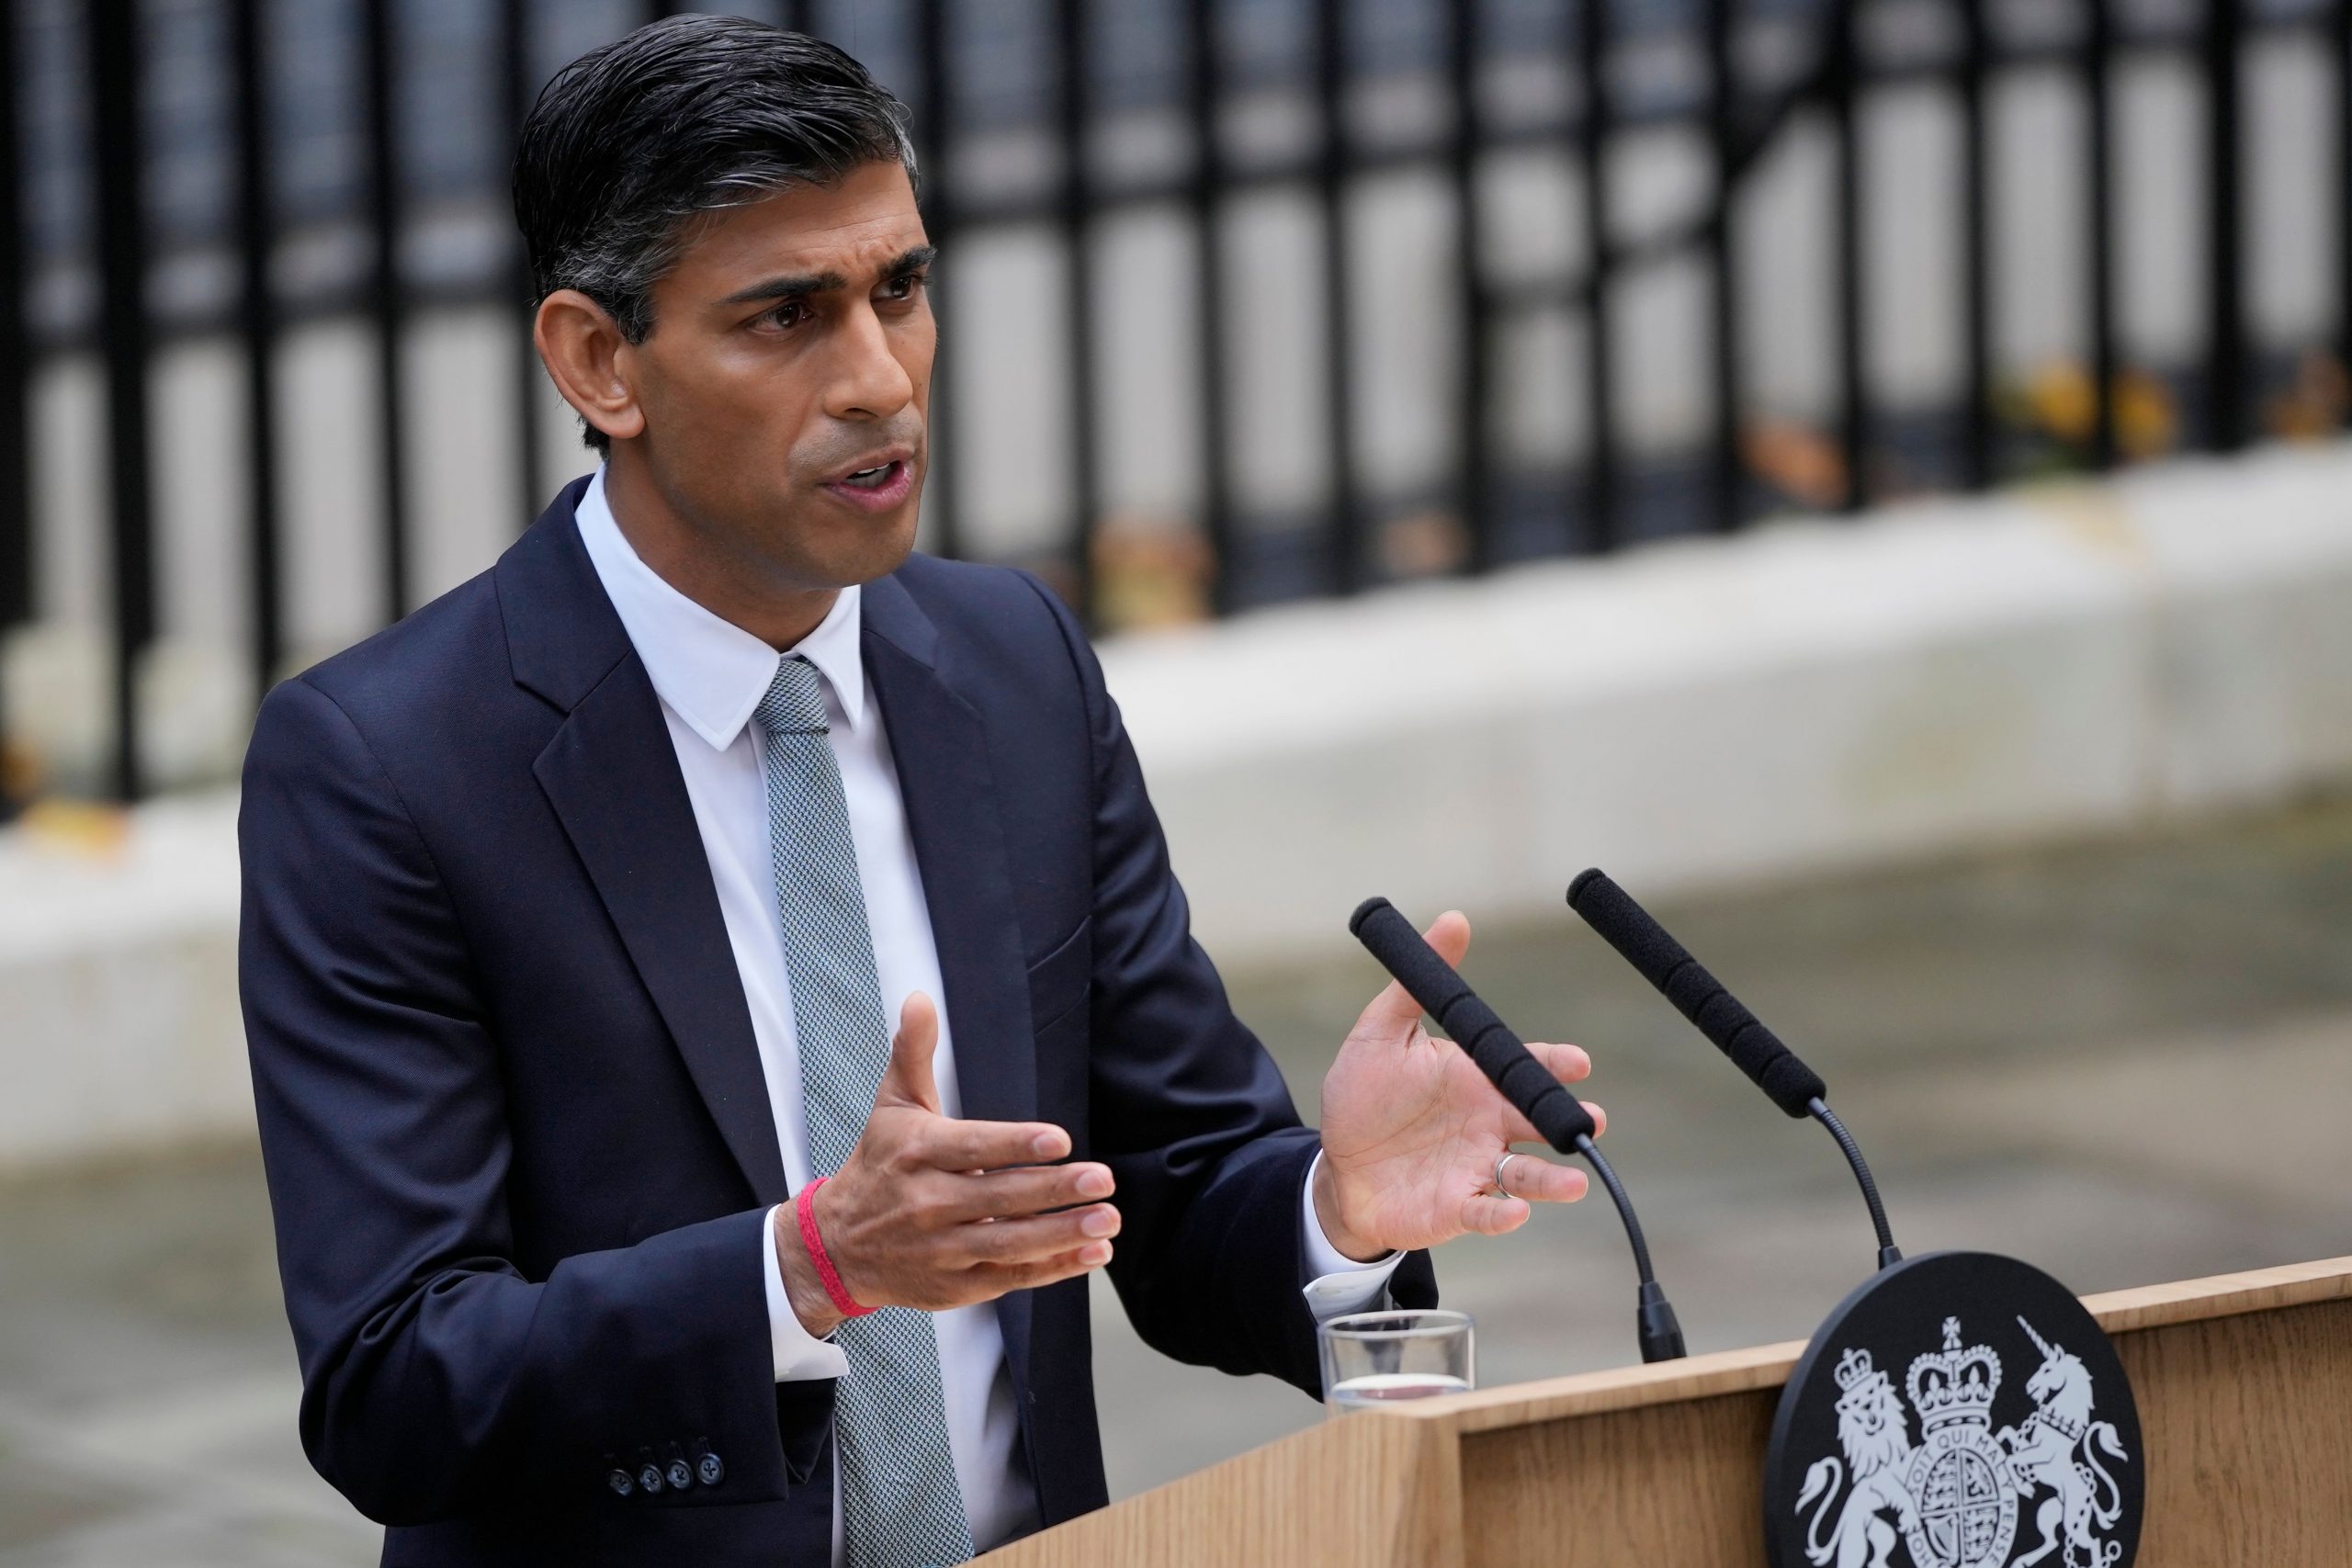 World leaders welcome Rishi Sunak as the new British prime minister